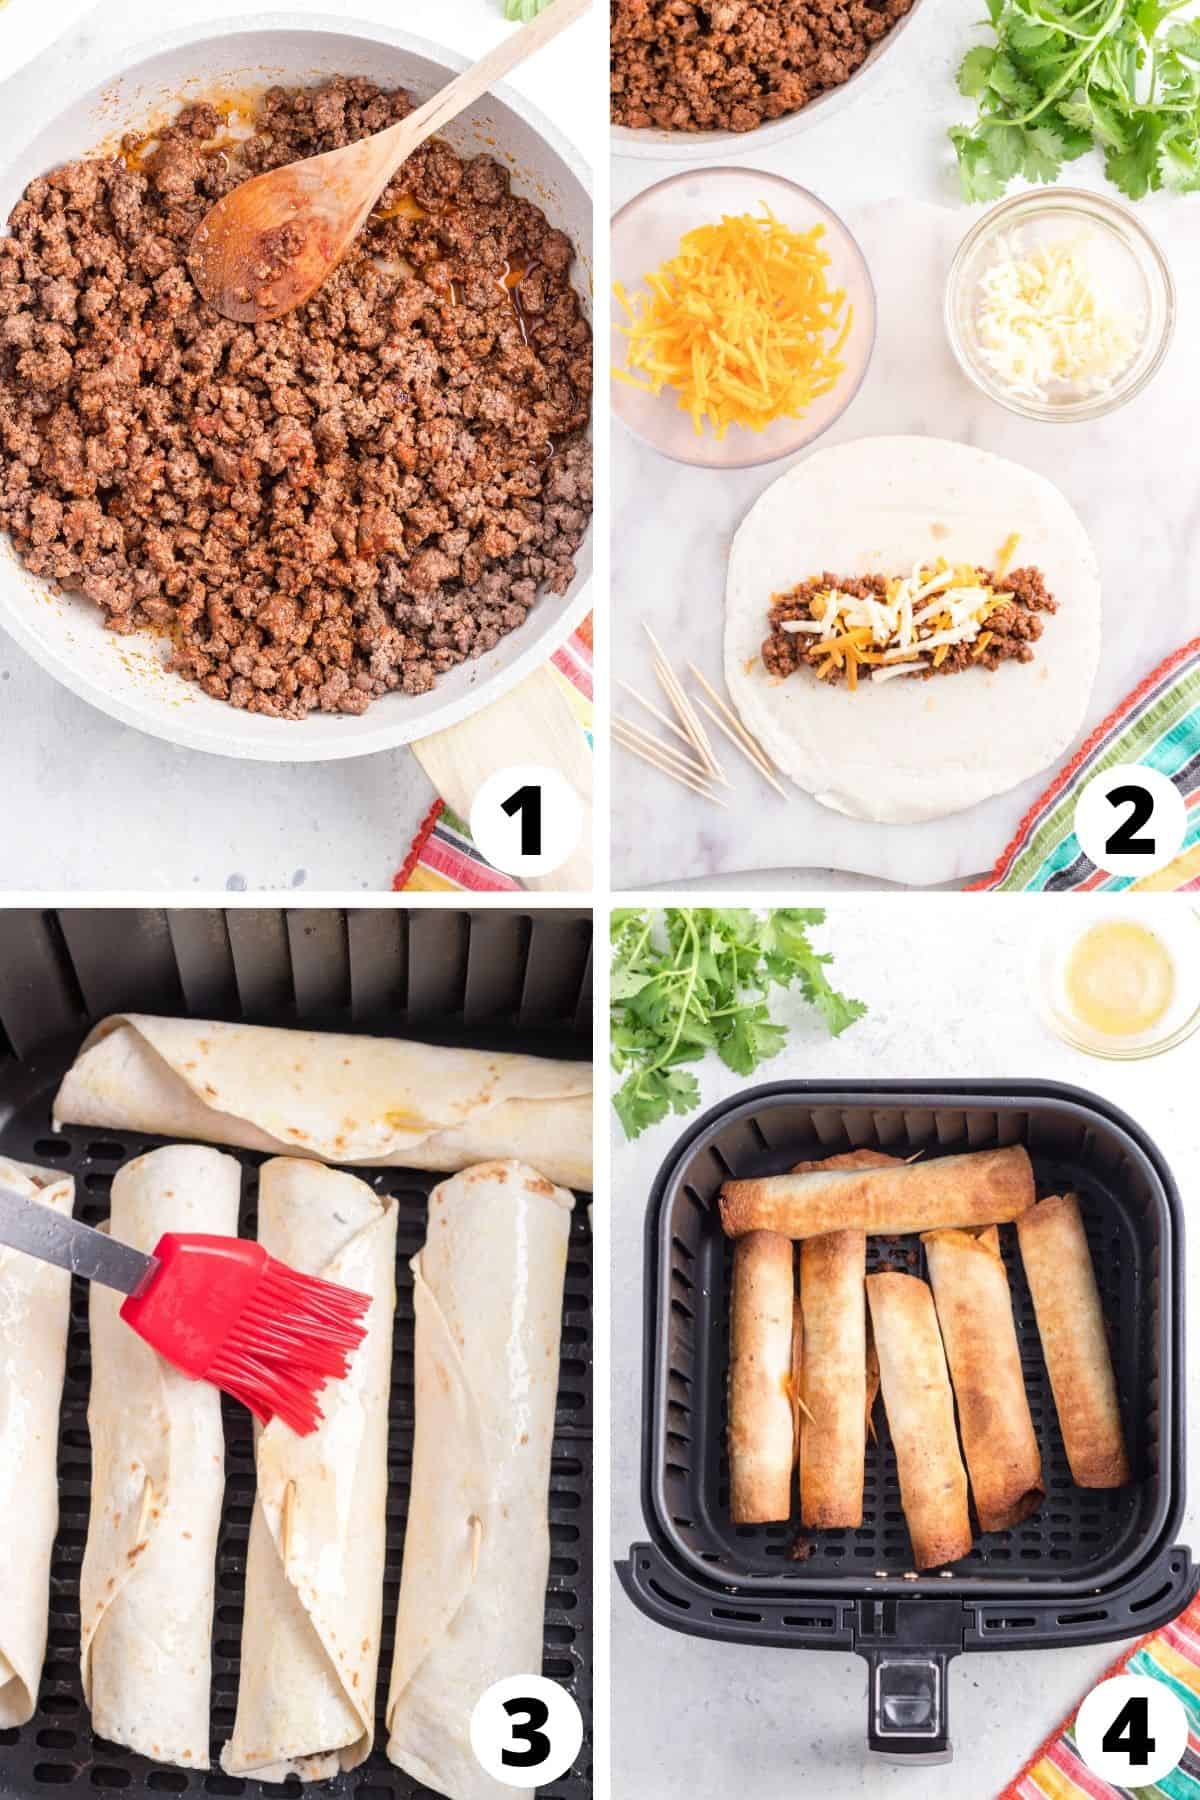 How to Make Taquitos in an Air Fryer